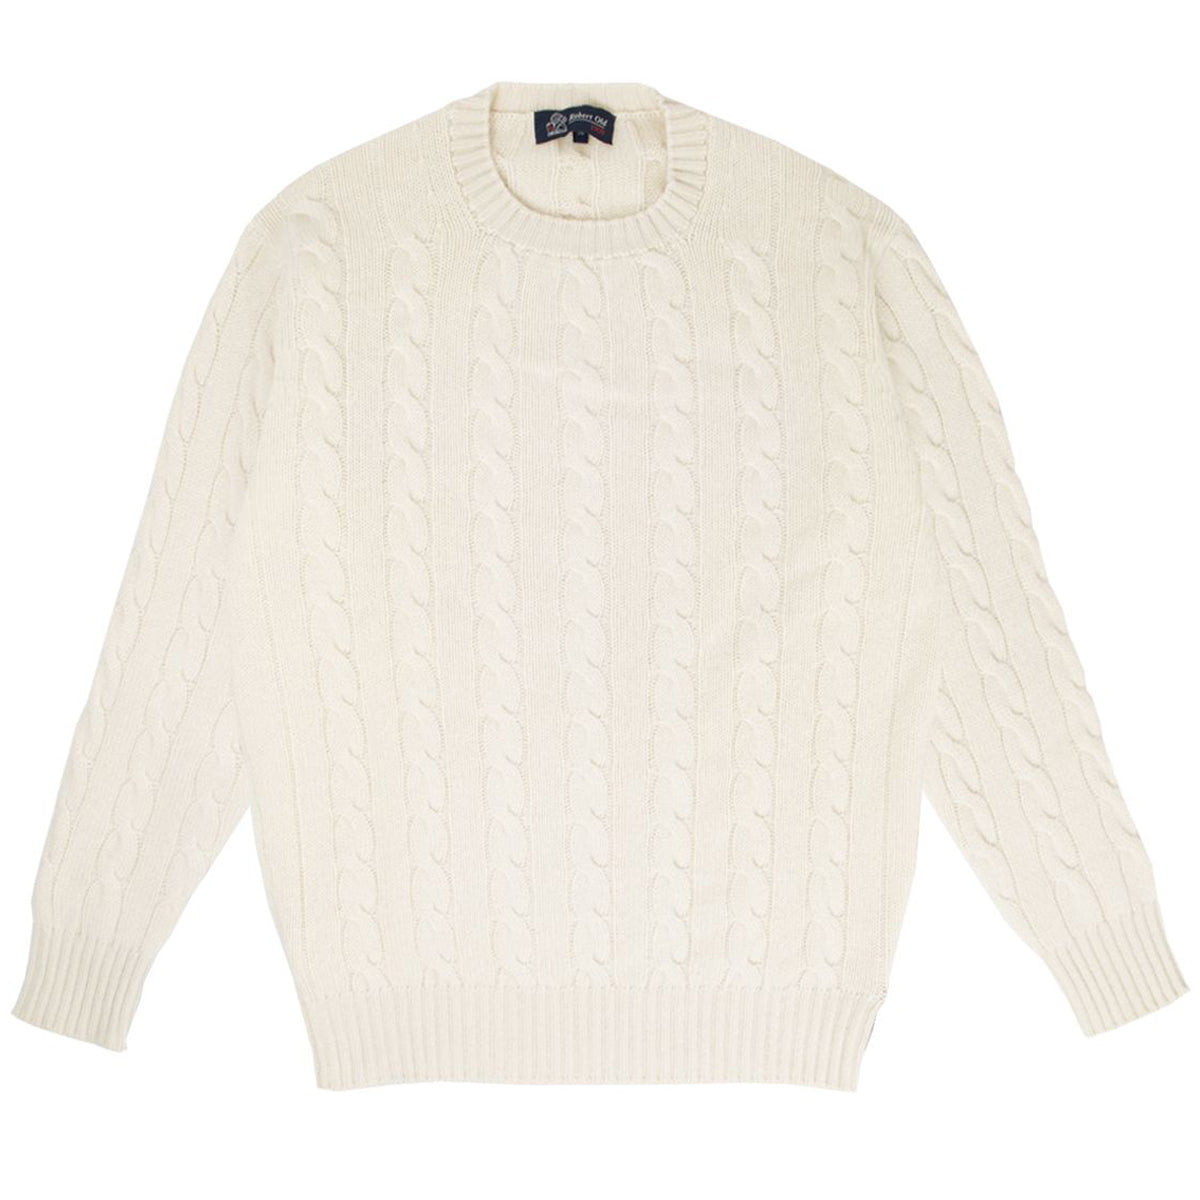 White Undyed Rothesay 4ply Cable Crew Cashmere Sweater  Robert Old   